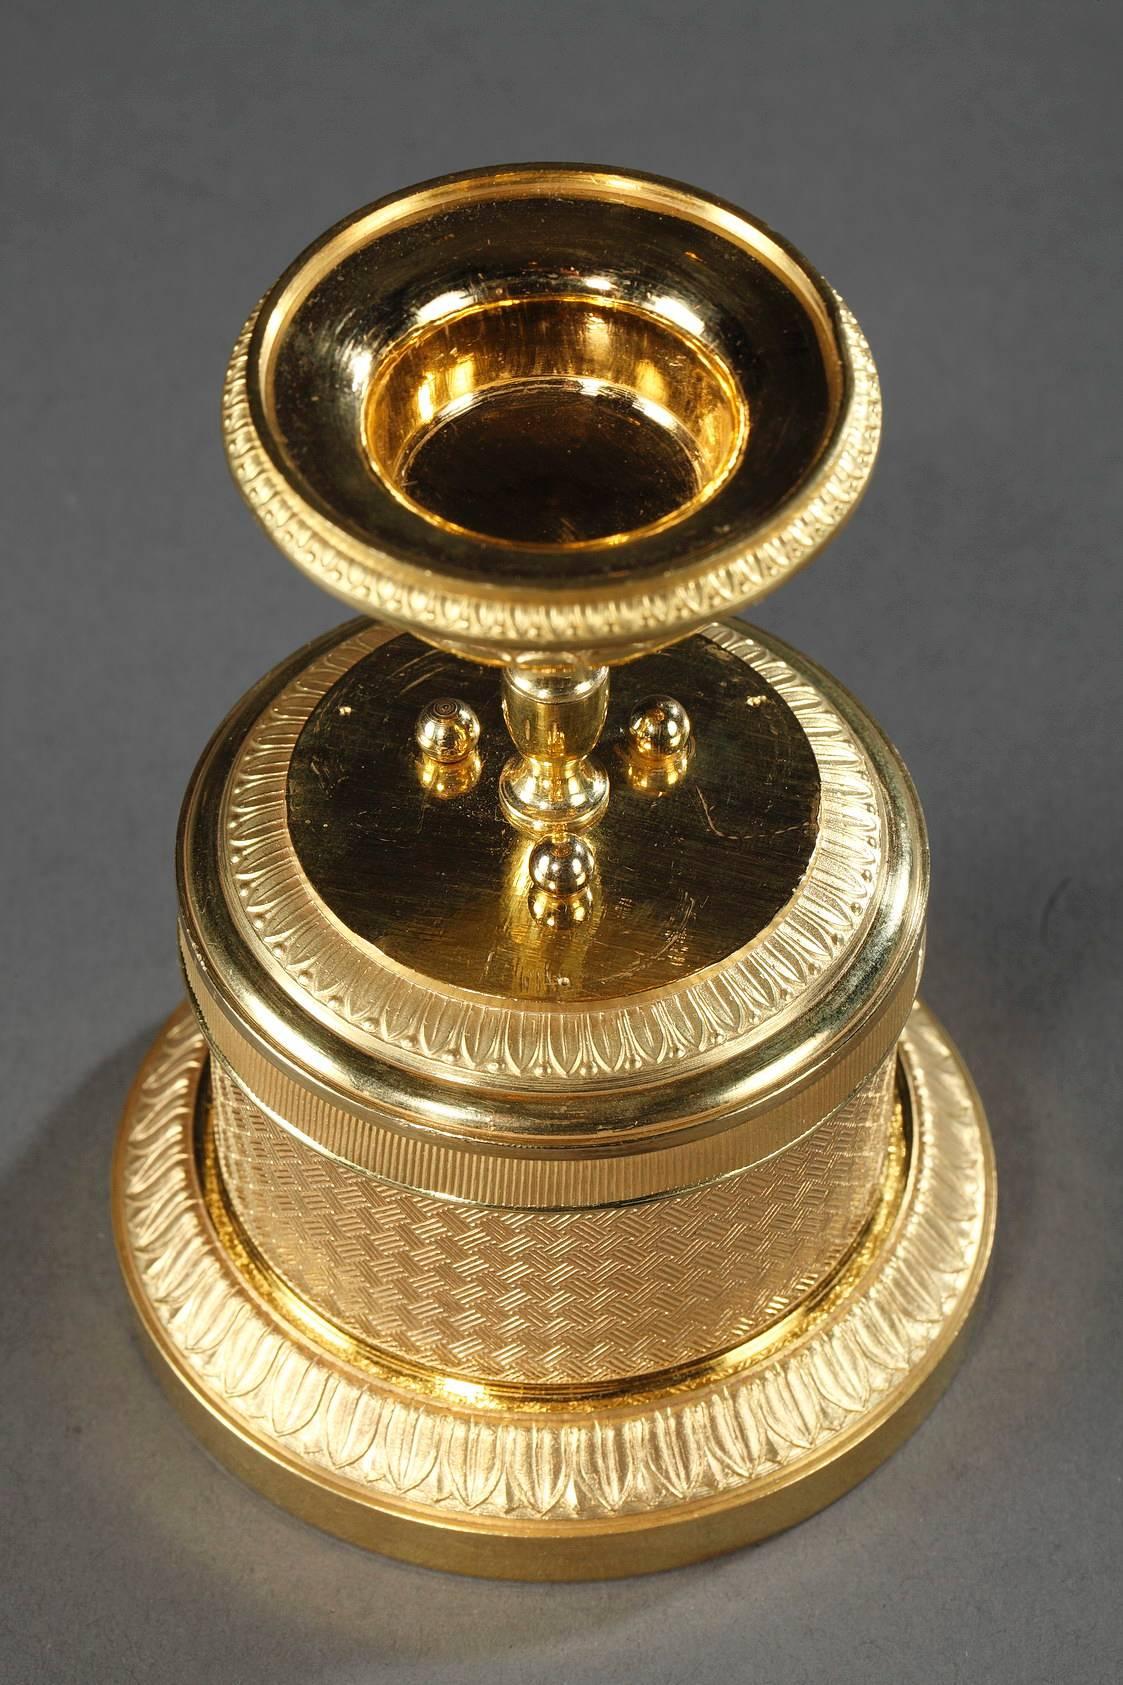 Combination trinket bowl and inkwell in gilt bronze. The lower portion features two ink pots, a pounce pot, and three pen holes. The exterior is expertly sculpted with latticework and water-leaf. The ribbed lid is topped with a cup that serves as a